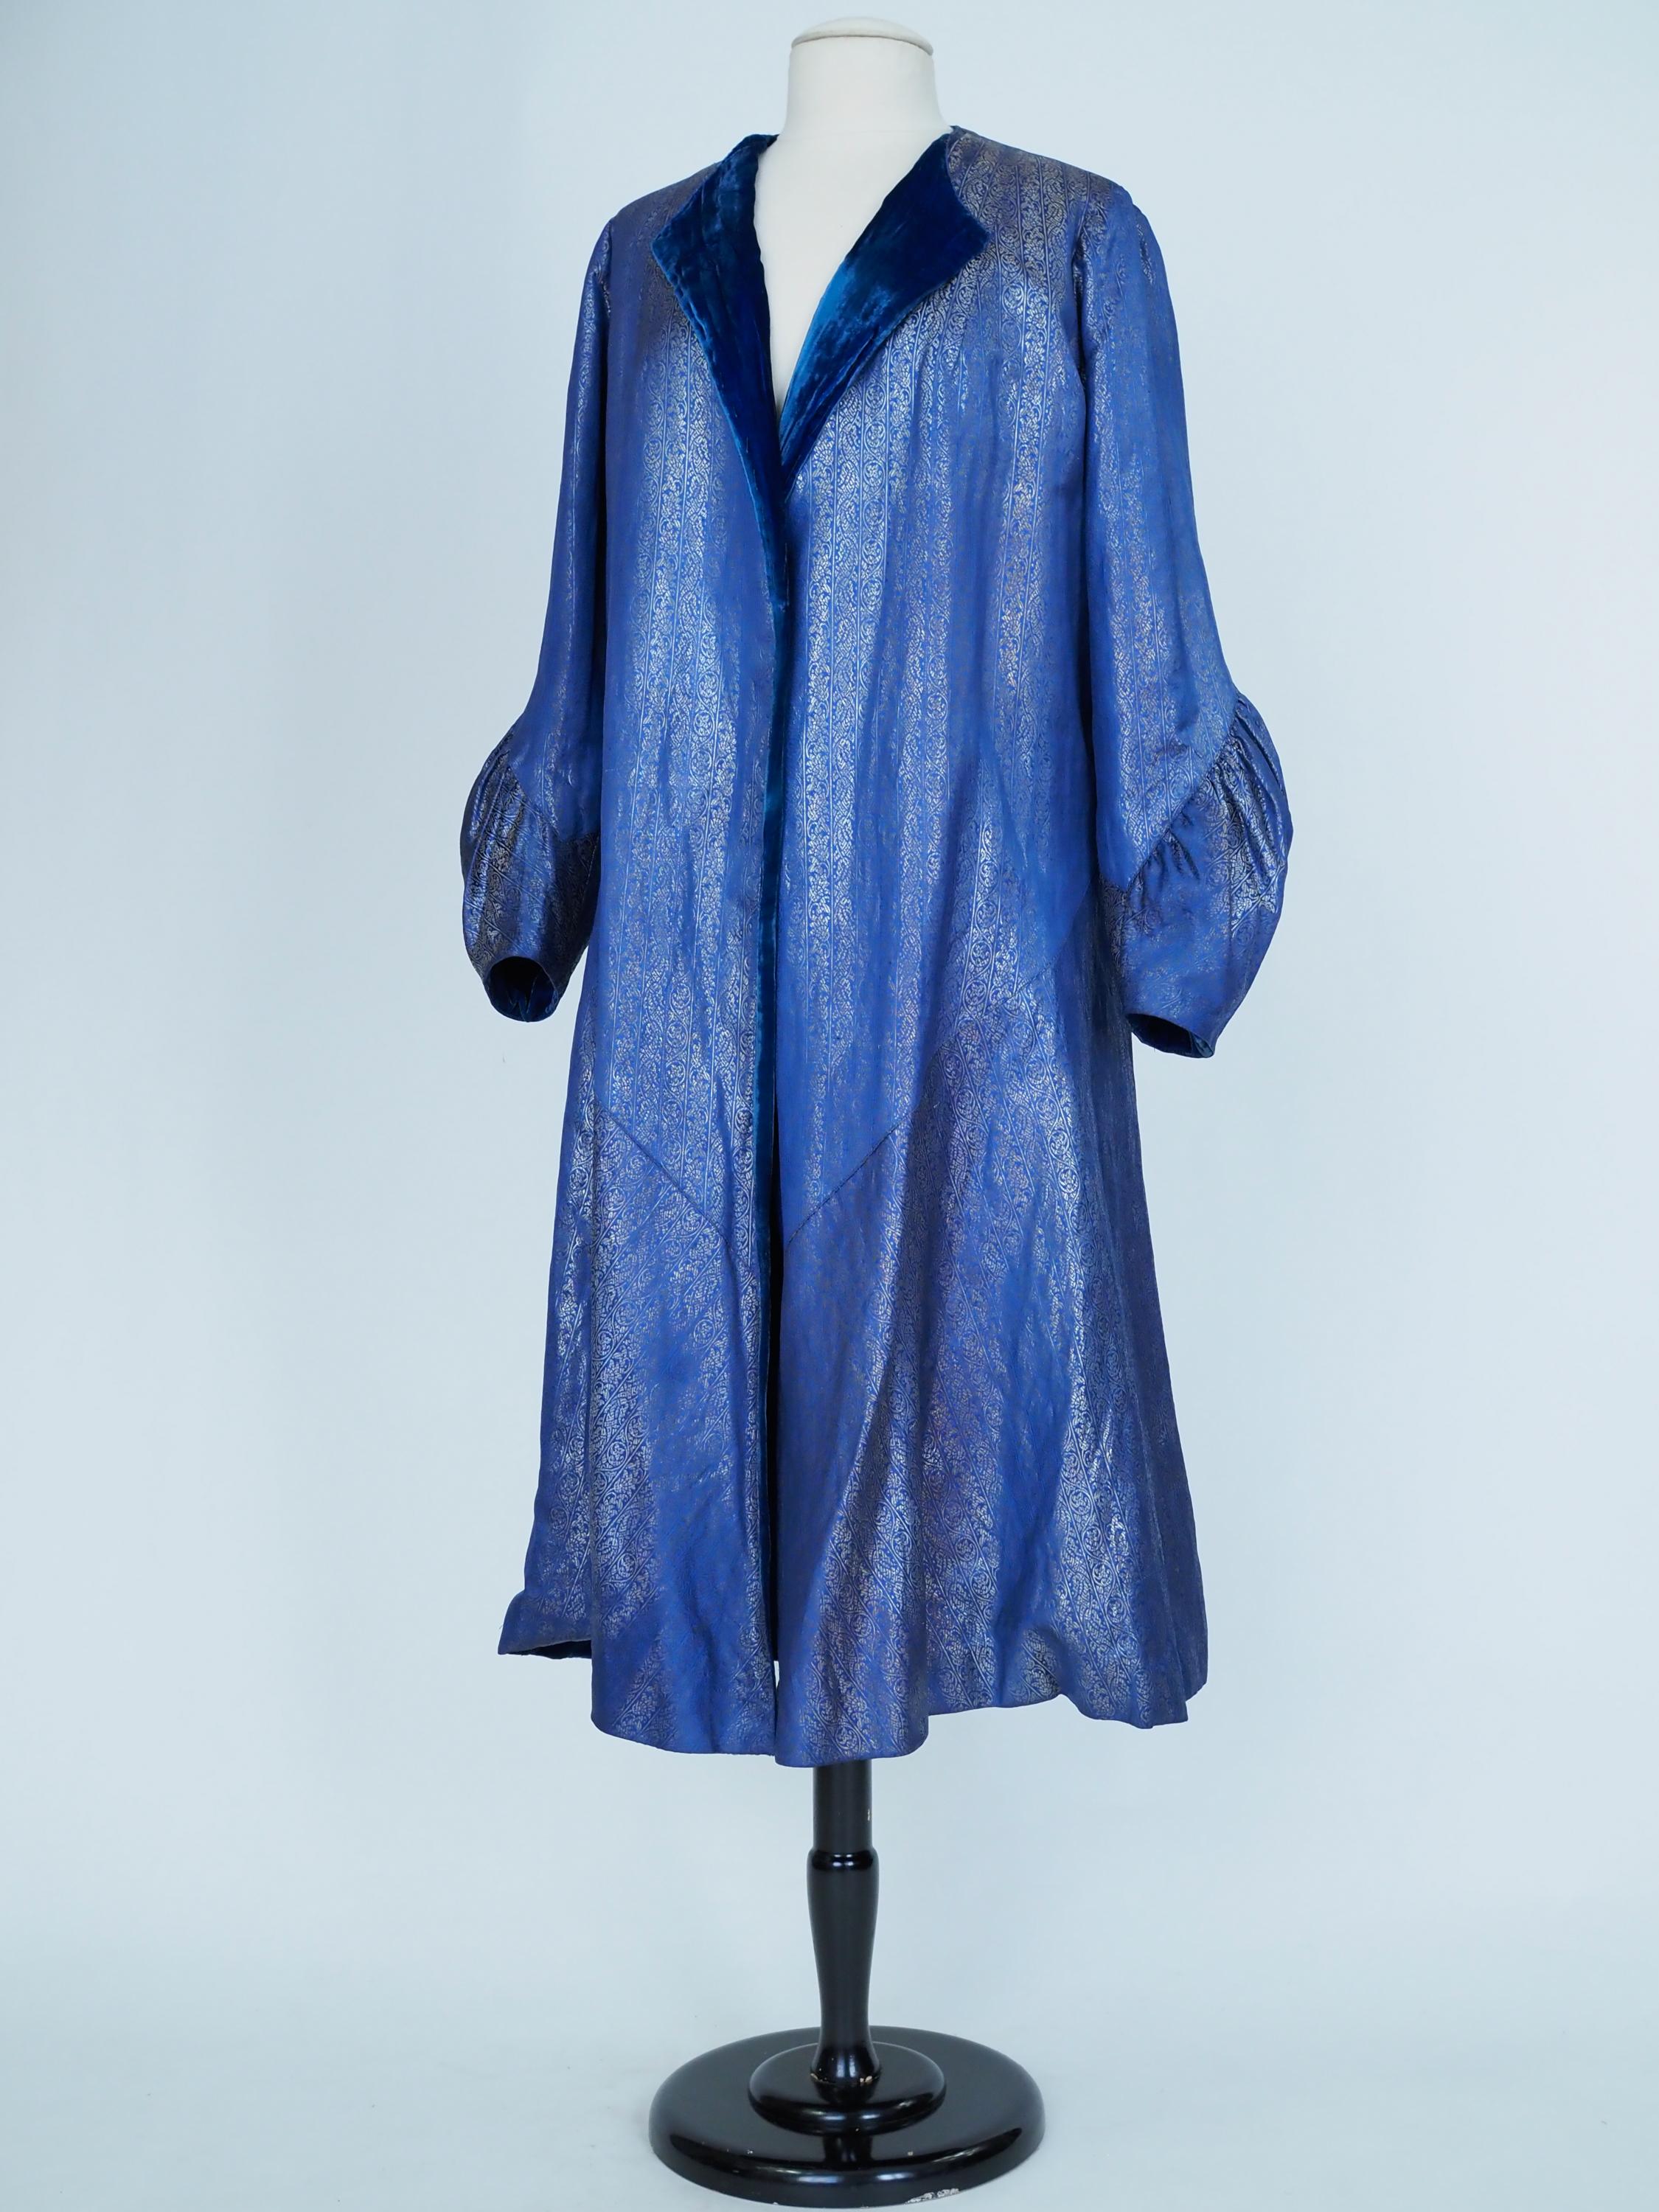 Evening Couture coat in silver lamé by Germaine Lecomte N°03871 Paris Circa 1930 For Sale 3